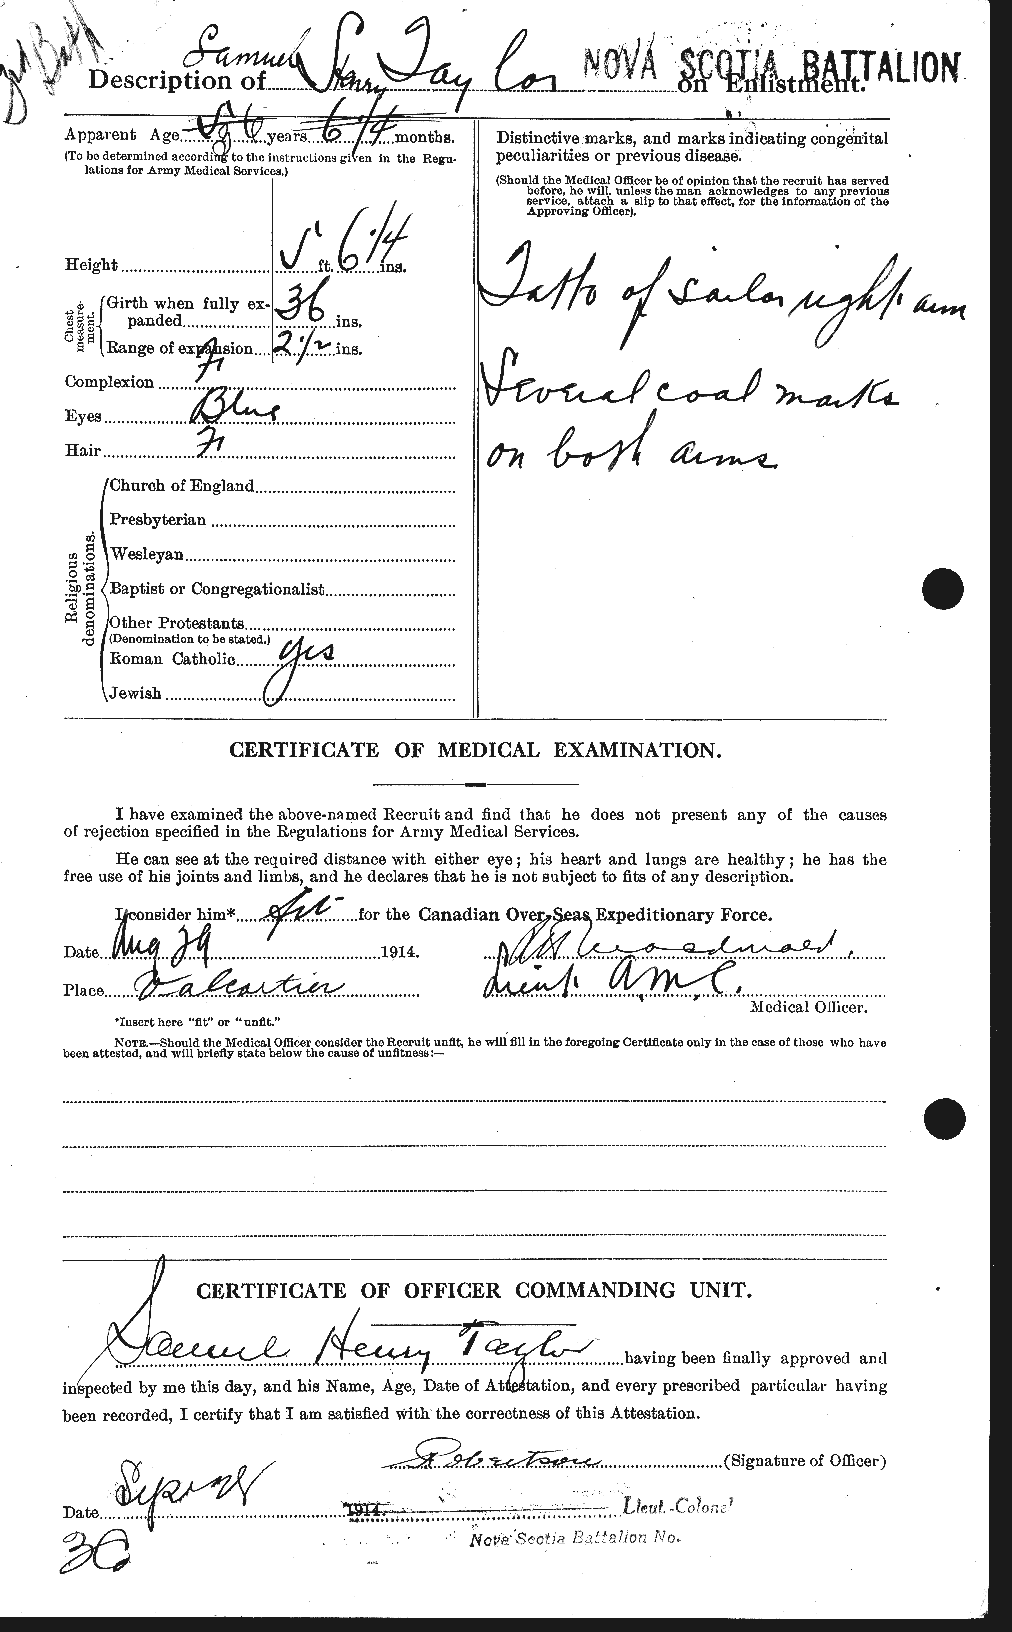 Personnel Records of the First World War - CEF 627878b